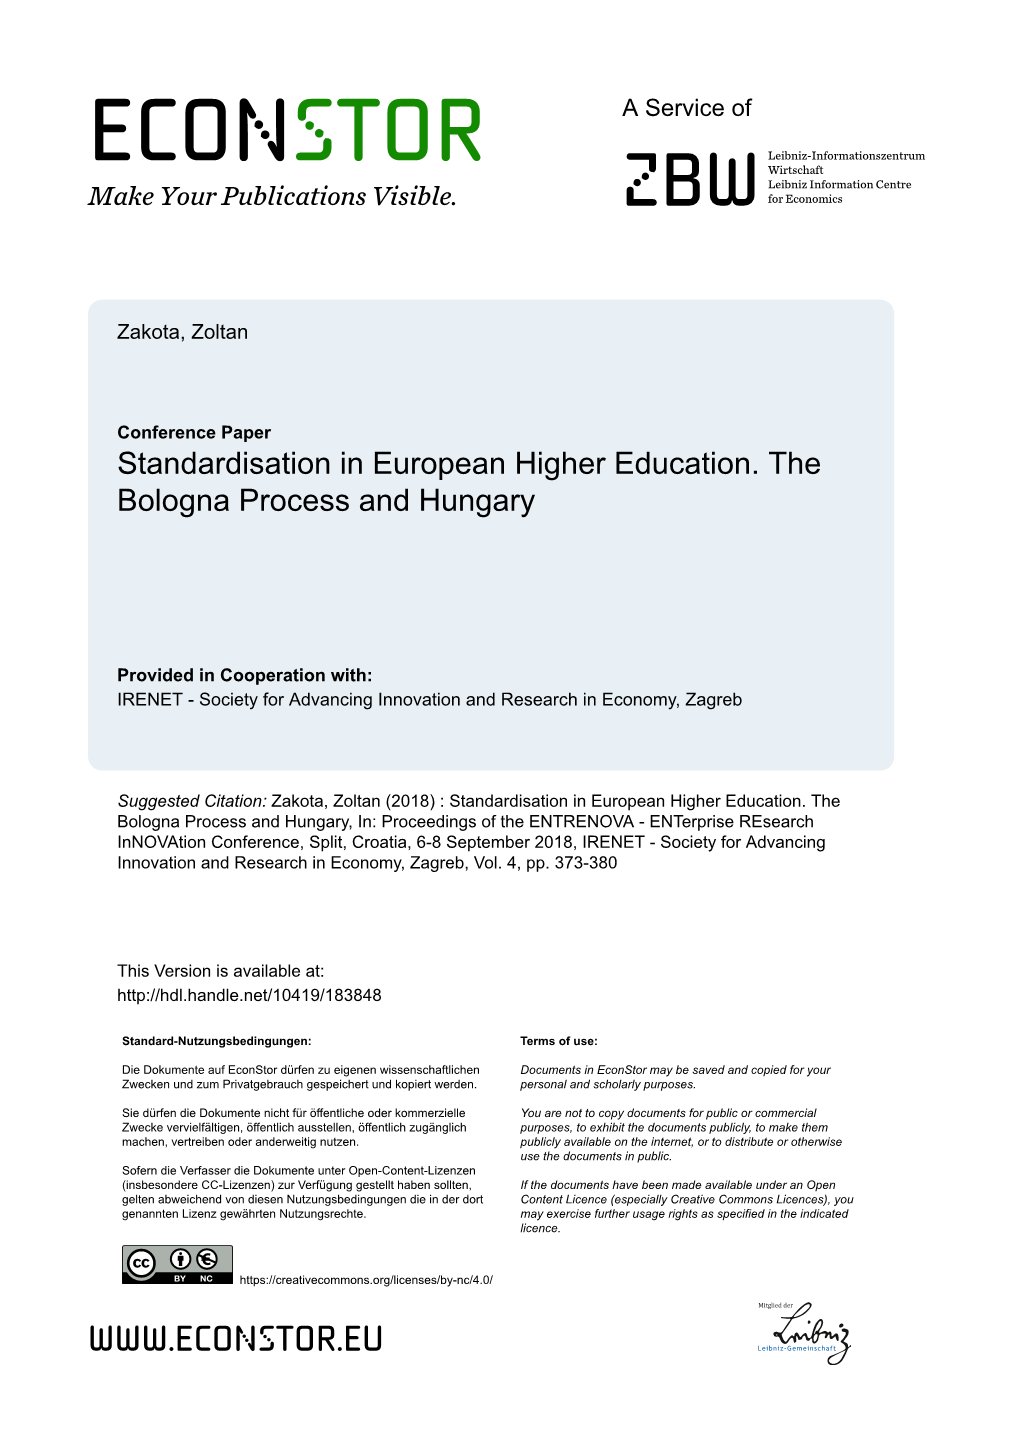 Standardisation in European Higher Education. the Bologna Process and Hungary